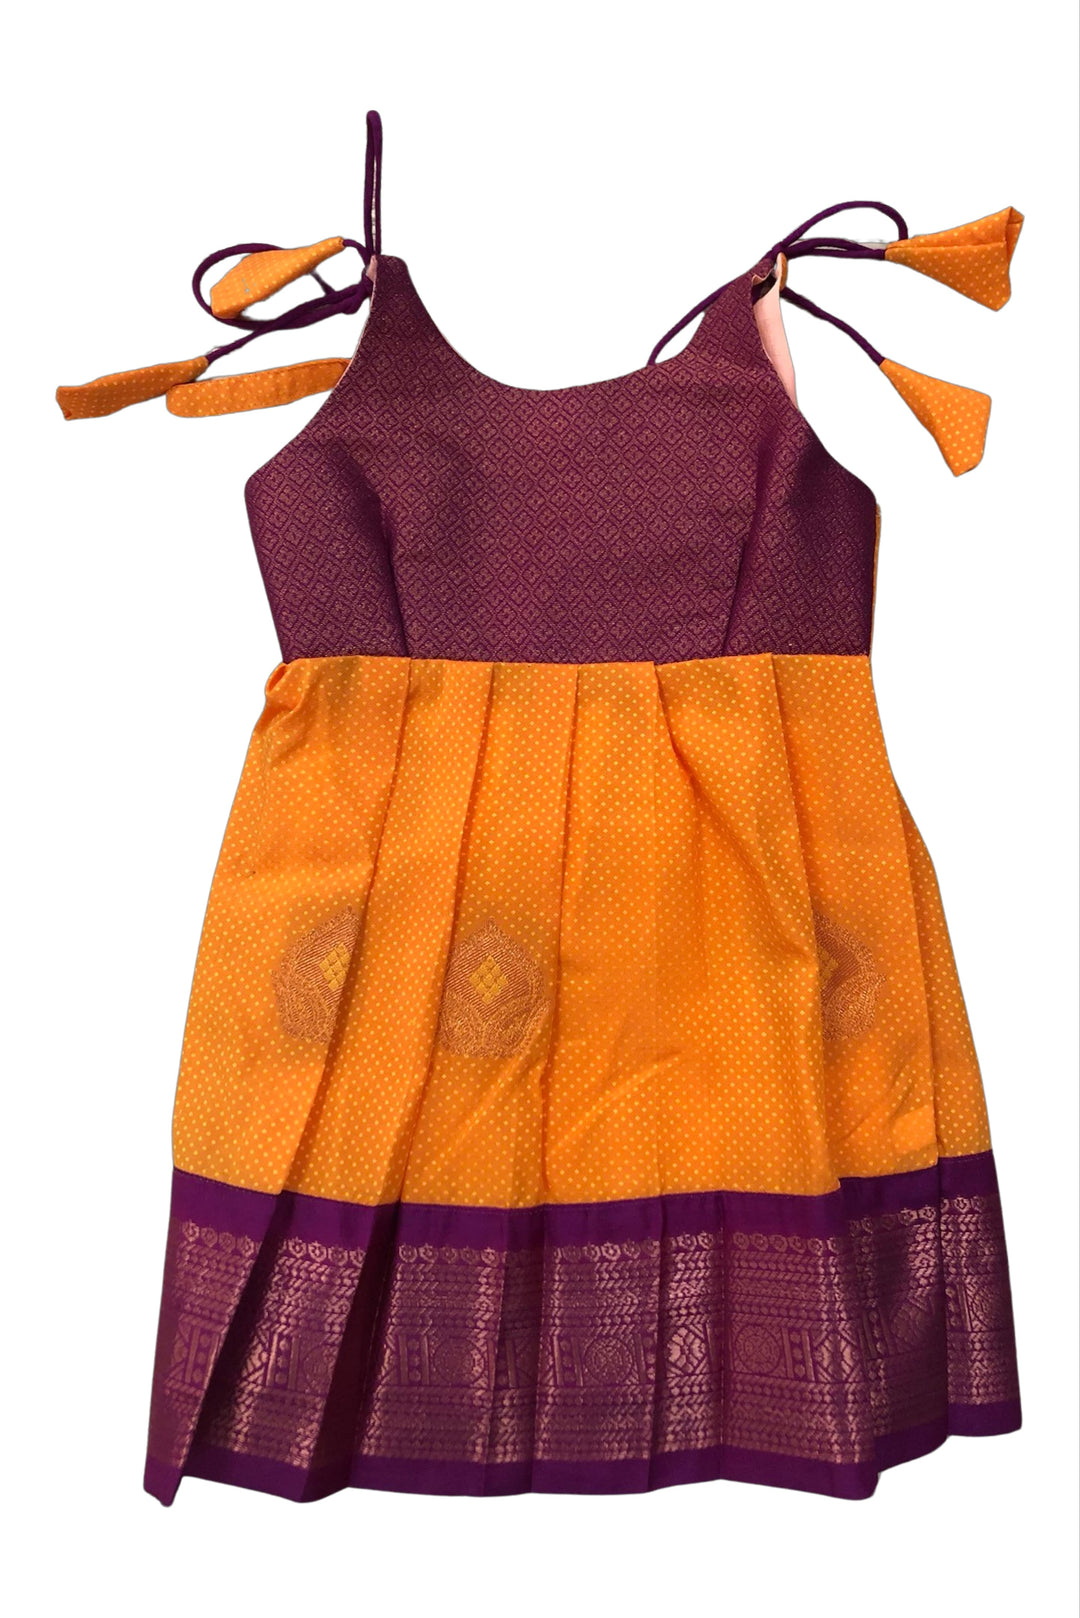 The Nesavu Tie-up Frock Traditional Silk Tie-Up Frock with Zari Embroidery for Girls Nesavu 16 (1Y) / Yellow / Style 3 T300C-16 Tie-Up Frock with Zari Work | Perfect for Festive Occasions | The Nesavu